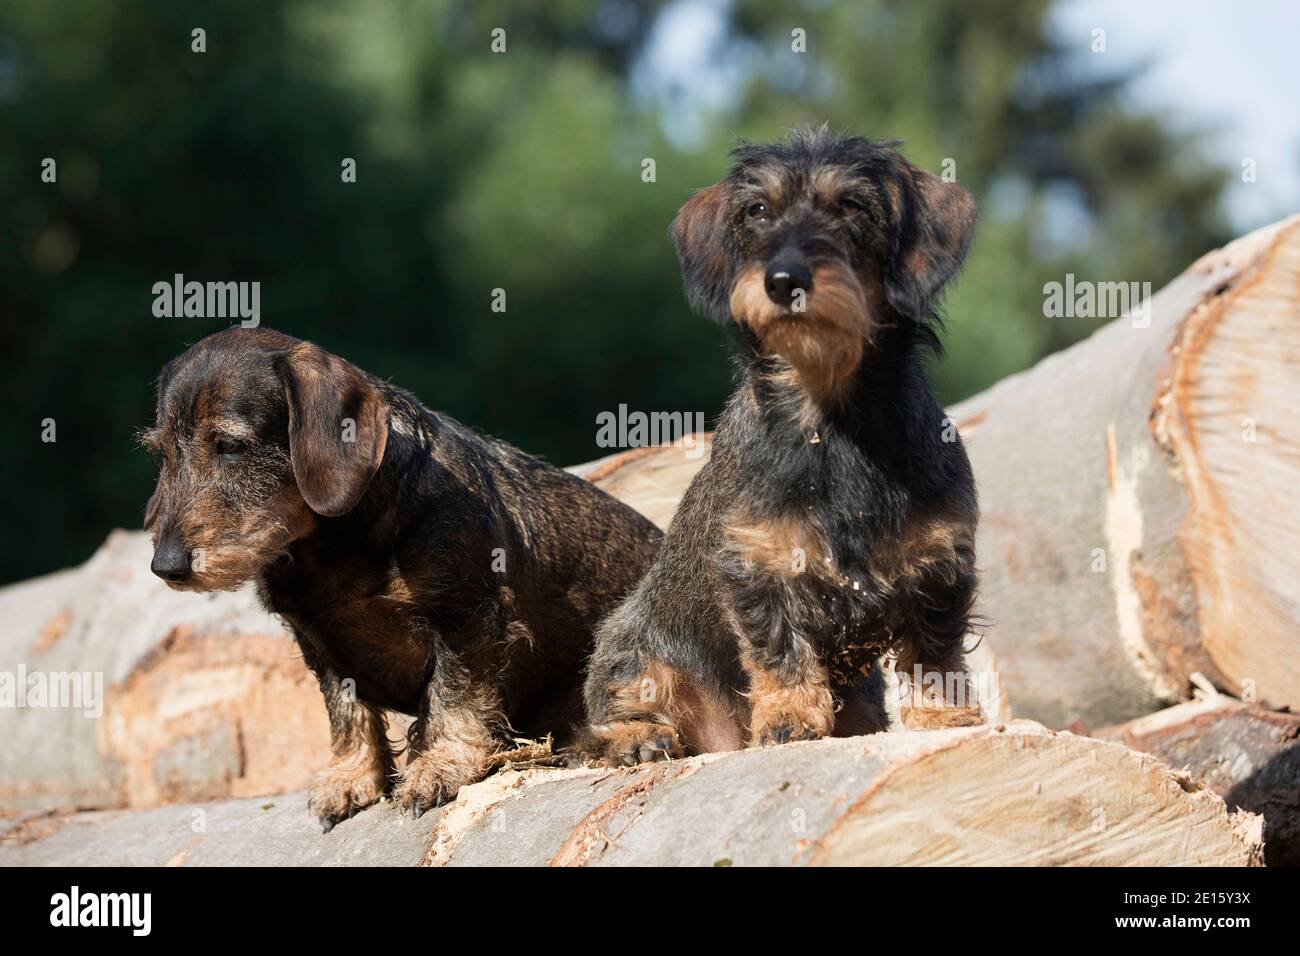 Two Dachshunds Stand On A Woodpile In The Forest Stock Photo